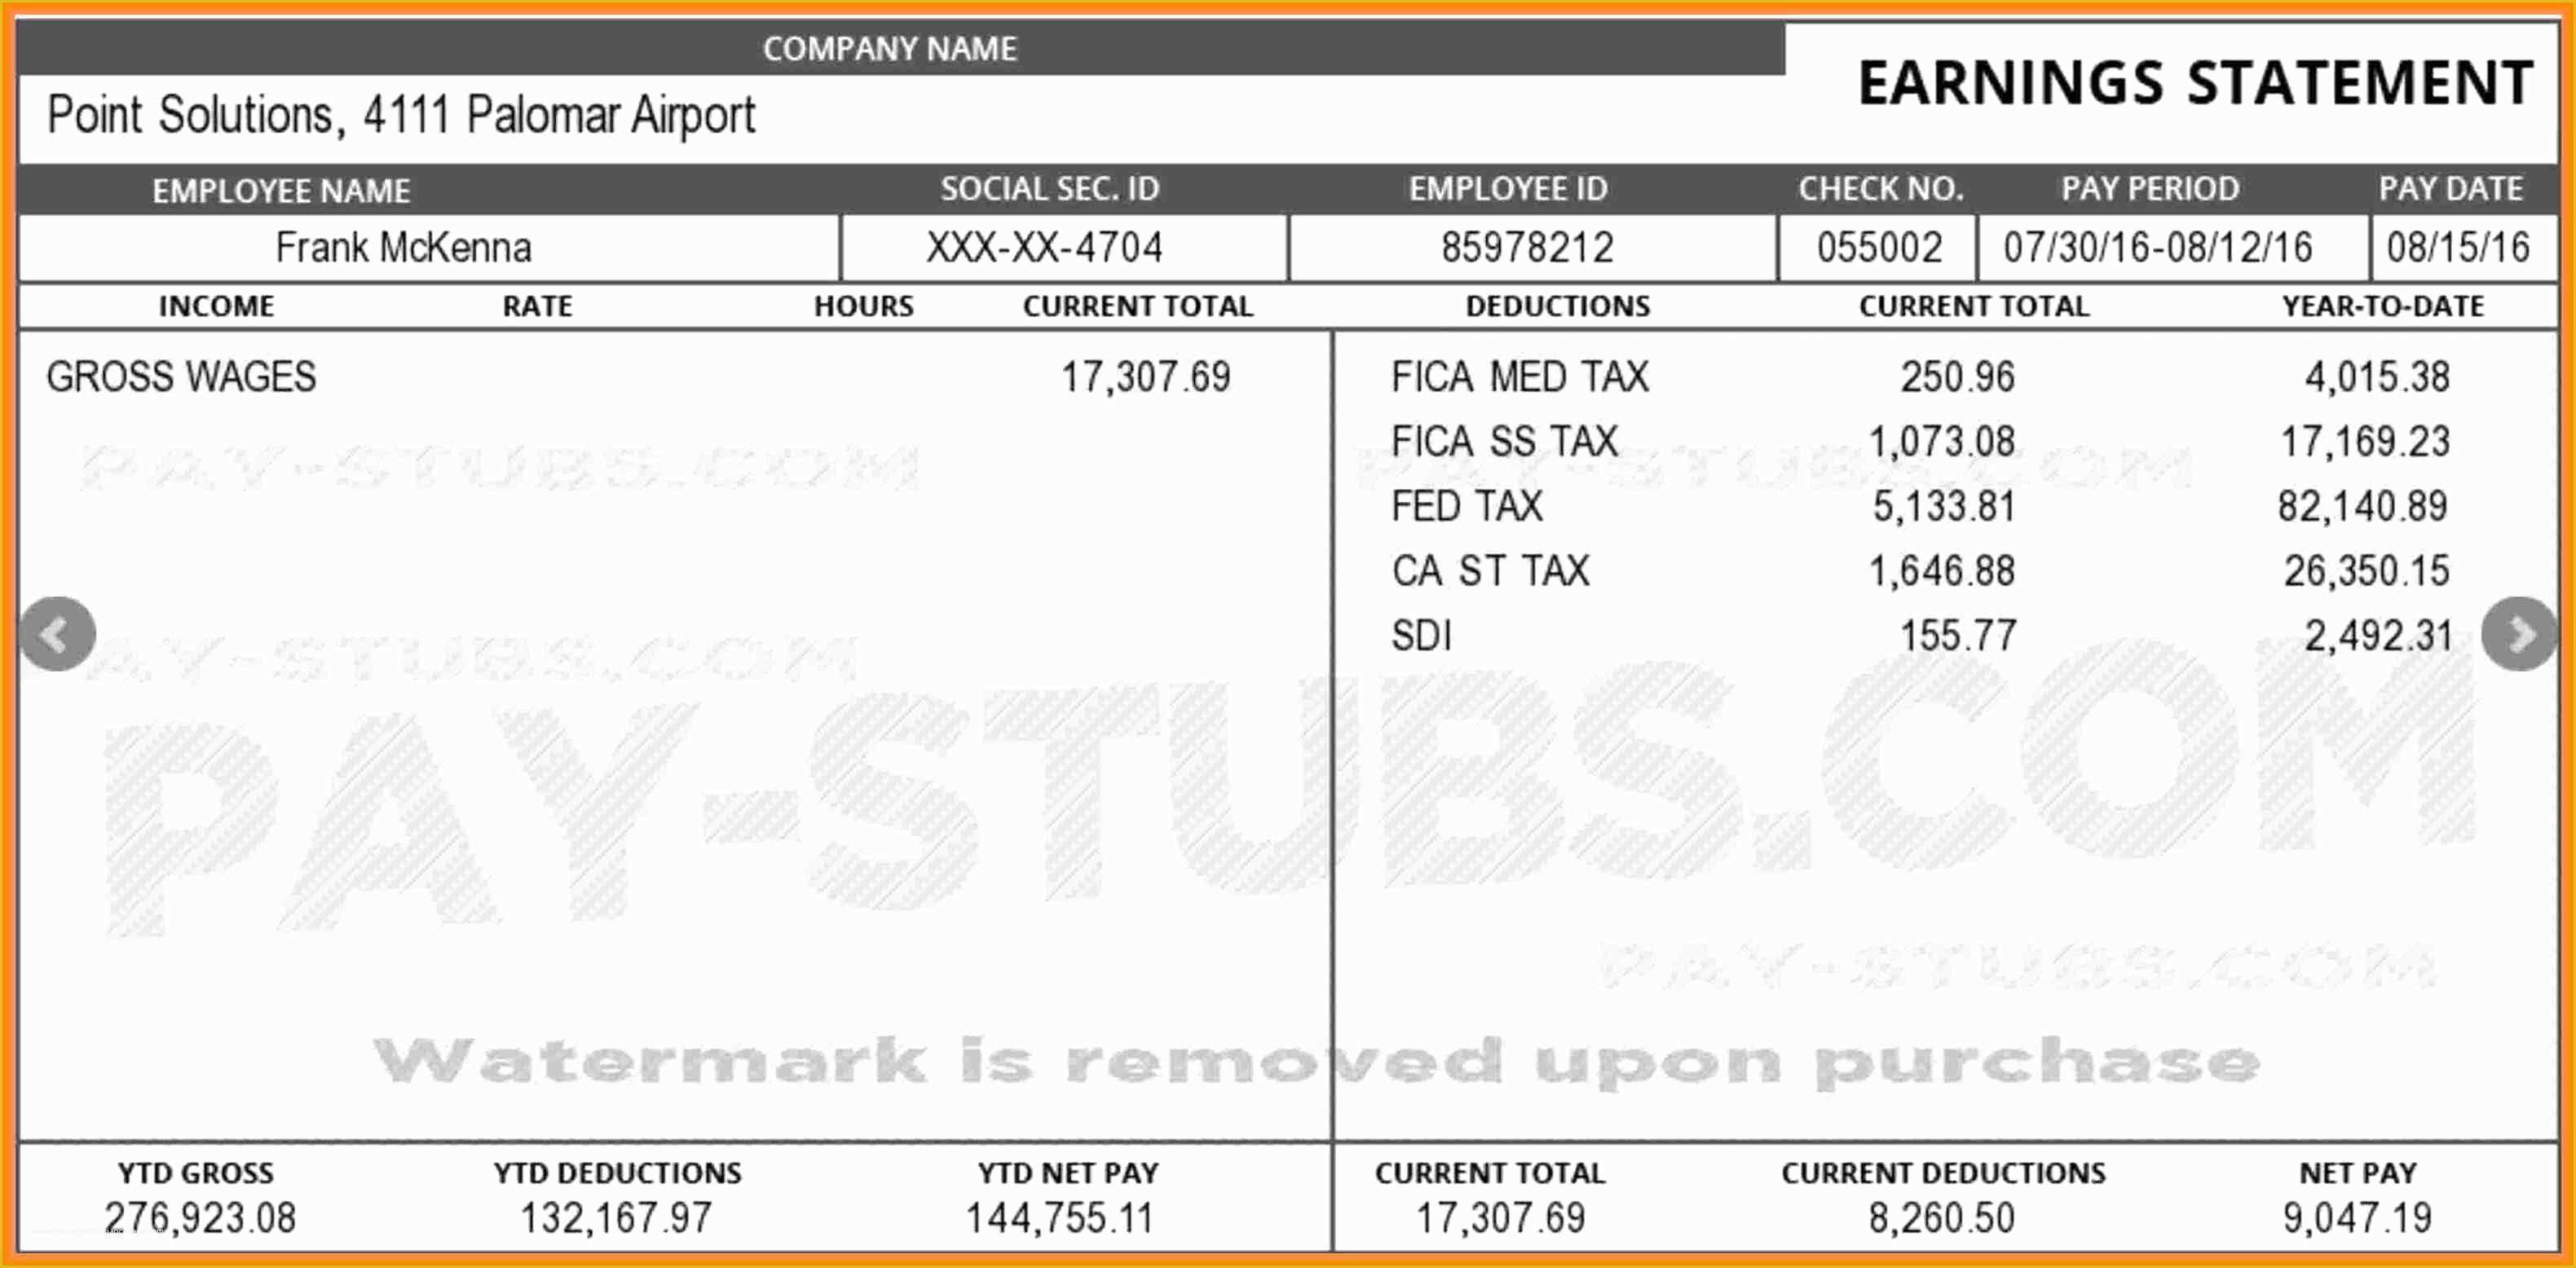 Free Employee Earnings Statement Template Of Earnings Statement Template Free Sample Worksheets Adp